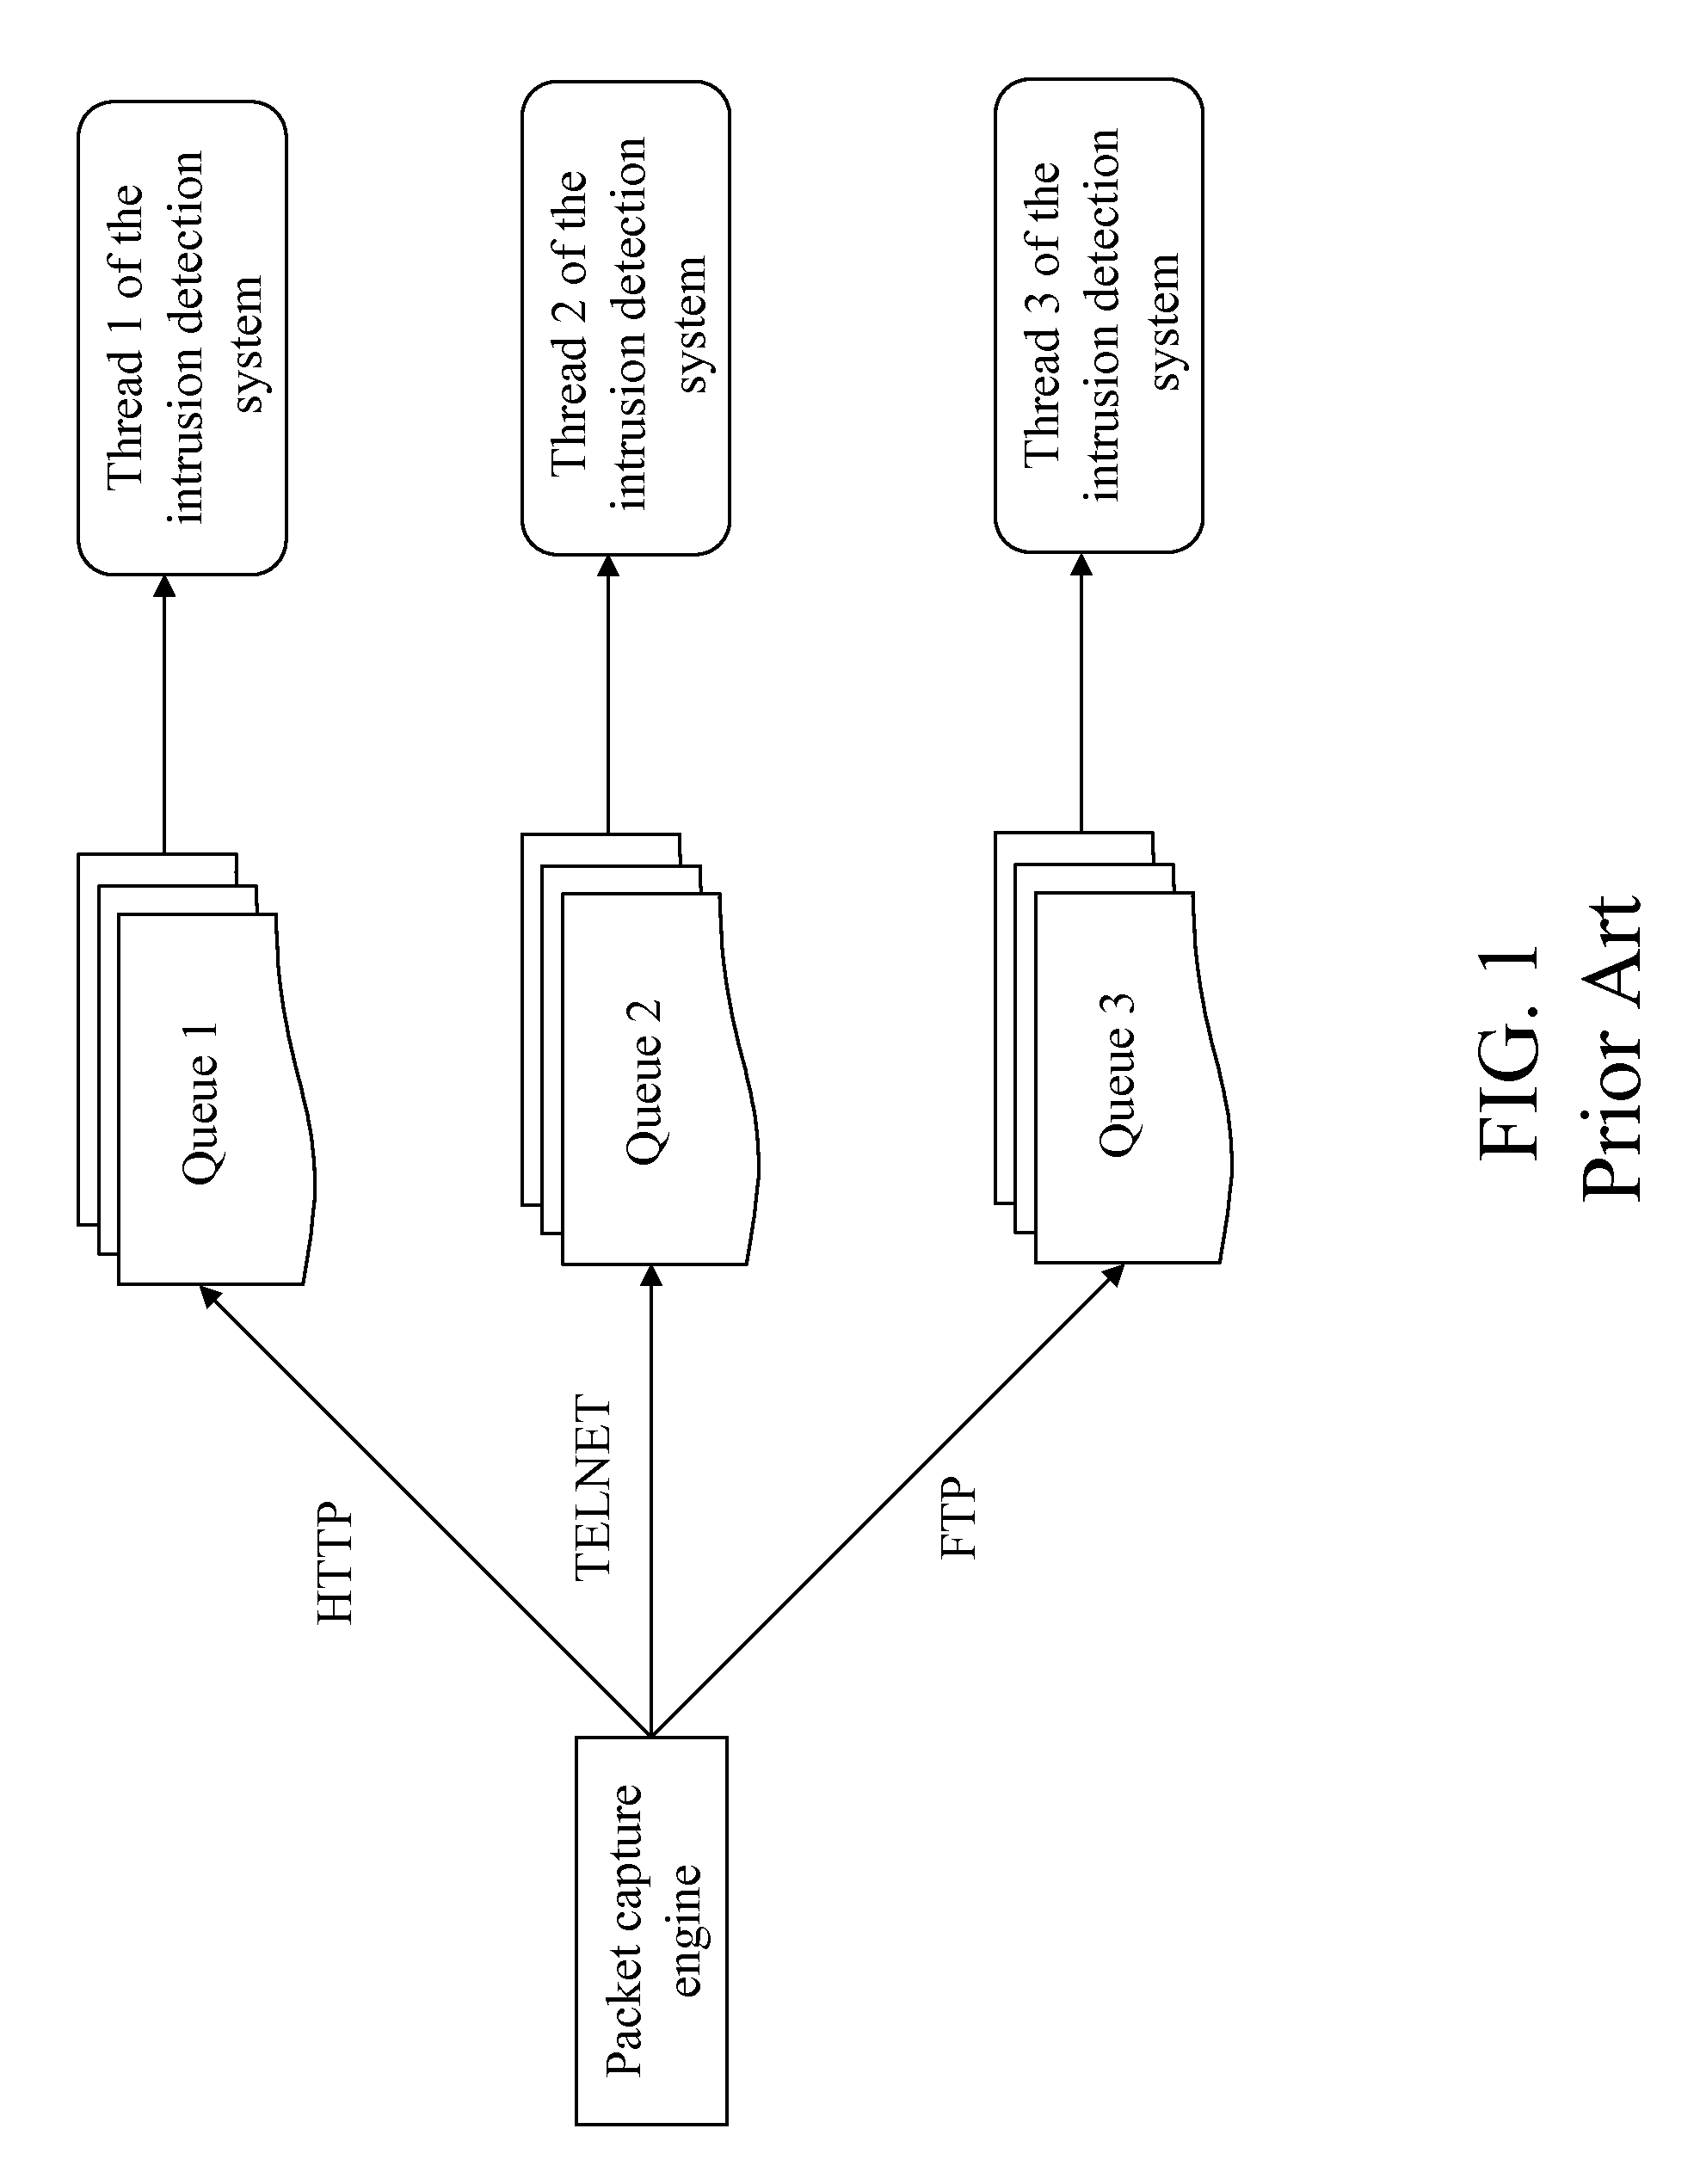 Load balancing method for network intrusion detection